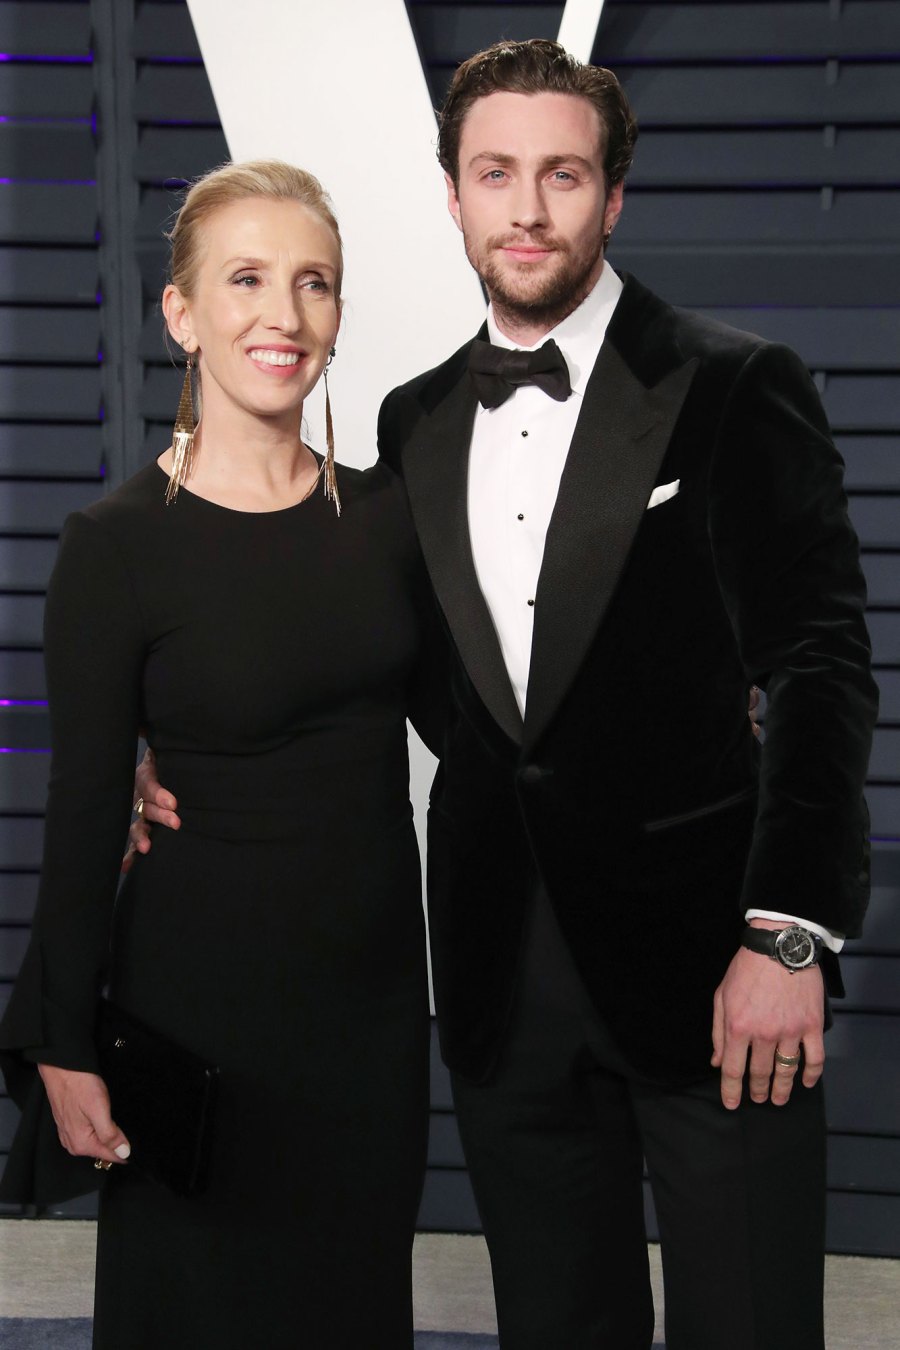 Sam Taylor-Johnson and Aaron Taylor-Johnson Celebrity Couples Who Combined Their Last Names After Marriage